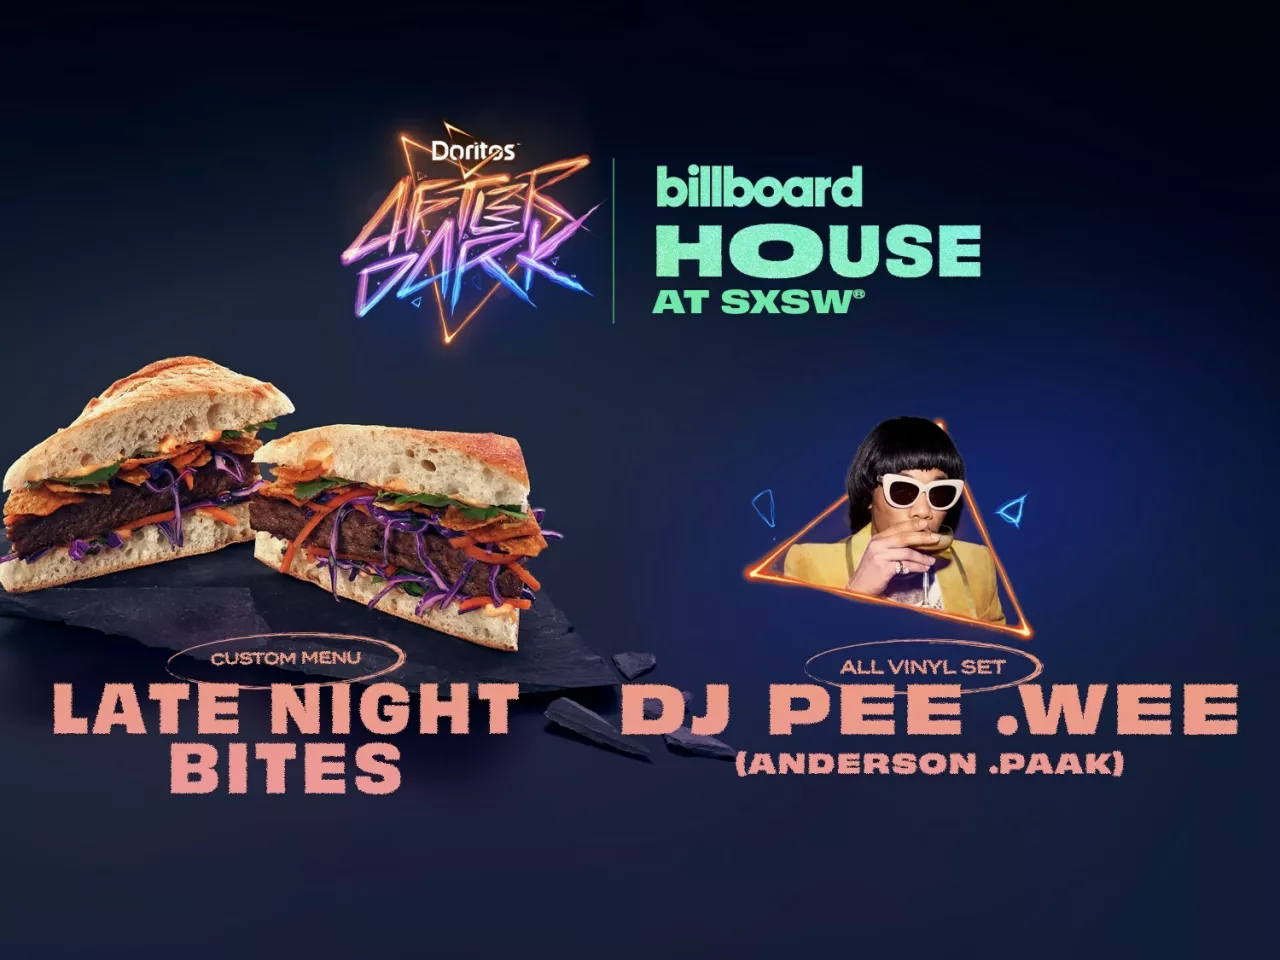 DORITOS® AFTER DARK™ DELIVERS LATE-NIGHT DINING AND ENTERTAINMENT AT SXSW® WITH DJ PEE .WEE AKA ANDERSON .PAAK AT BILLBOARD HOUSE. img#1